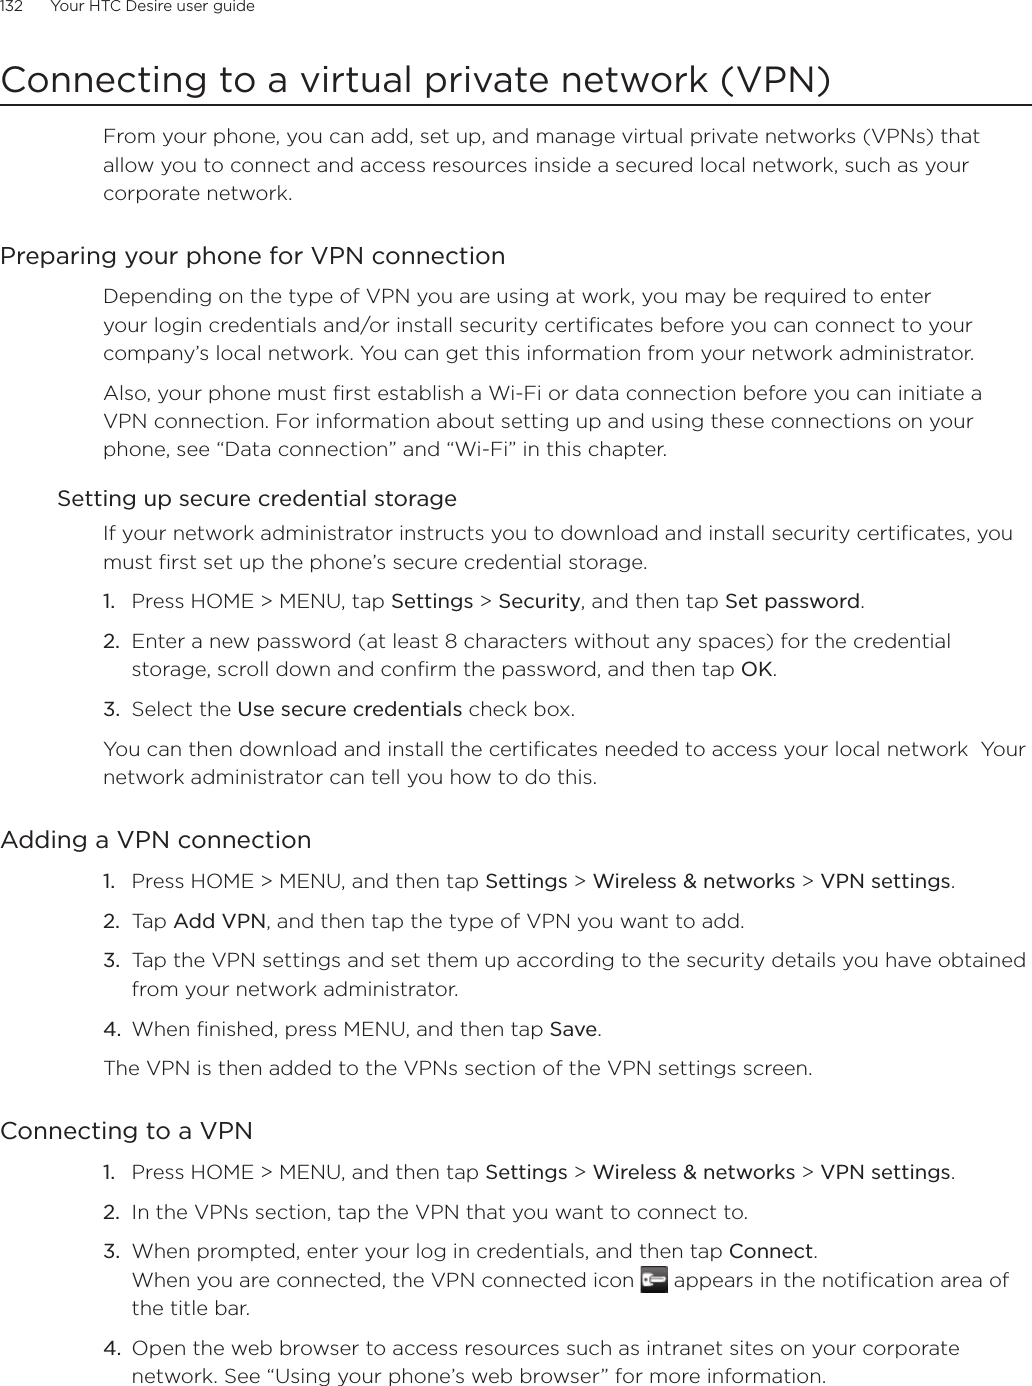 132      Your HTC Desire user guide      Connecting to a virtual private network (VPN)From your phone, you can add, set up, and manage virtual private networks (VPNs) that allow you to connect and access resources inside a secured local network, such as your corporate network.Preparing your phone for VPN connectionDepending on the type of VPN you are using at work, you may be required to enter your login credentials and/or install security certificates before you can connect to your company’s local network. You can get this information from your network administrator. Also, your phone must first establish a Wi-Fi or data connection before you can initiate a VPN connection. For information about setting up and using these connections on your phone, see “Data connection” and “Wi-Fi” in this chapter.Setting up secure credential storageIf your network administrator instructs you to download and install security certificates, you must first set up the phone’s secure credential storage.Press HOME &gt; MENU, tap Settings &gt; Security, and then tap Set password.Enter a new password (at least 8 characters without any spaces) for the credential storage, scroll down and confirm the password, and then tap OK.Select the Use secure credentials check box.You can then download and install the certificates needed to access your local network  Your network administrator can tell you how to do this.Adding a VPN connectionPress HOME &gt; MENU, and then tap Settings &gt; Wireless &amp; networks &gt; VPN settings.Tap Add VPN, and then tap the type of VPN you want to add.Tap the VPN settings and set them up according to the security details you have obtained from your network administrator.When finished, press MENU, and then tap Save.The VPN is then added to the VPNs section of the VPN settings screen.Connecting to a VPNPress HOME &gt; MENU, and then tap Settings &gt; Wireless &amp; networks &gt; VPN settings.In the VPNs section, tap the VPN that you want to connect to.When prompted, enter your log in credentials, and then tap Connect.When you are connected, the VPN connected icon   appears in the notification area of the title bar.Open the web browser to access resources such as intranet sites on your corporate network. See “Using your phone’s web browser” for more information.1.2.3.1.2.3.4.1.2.3.4.